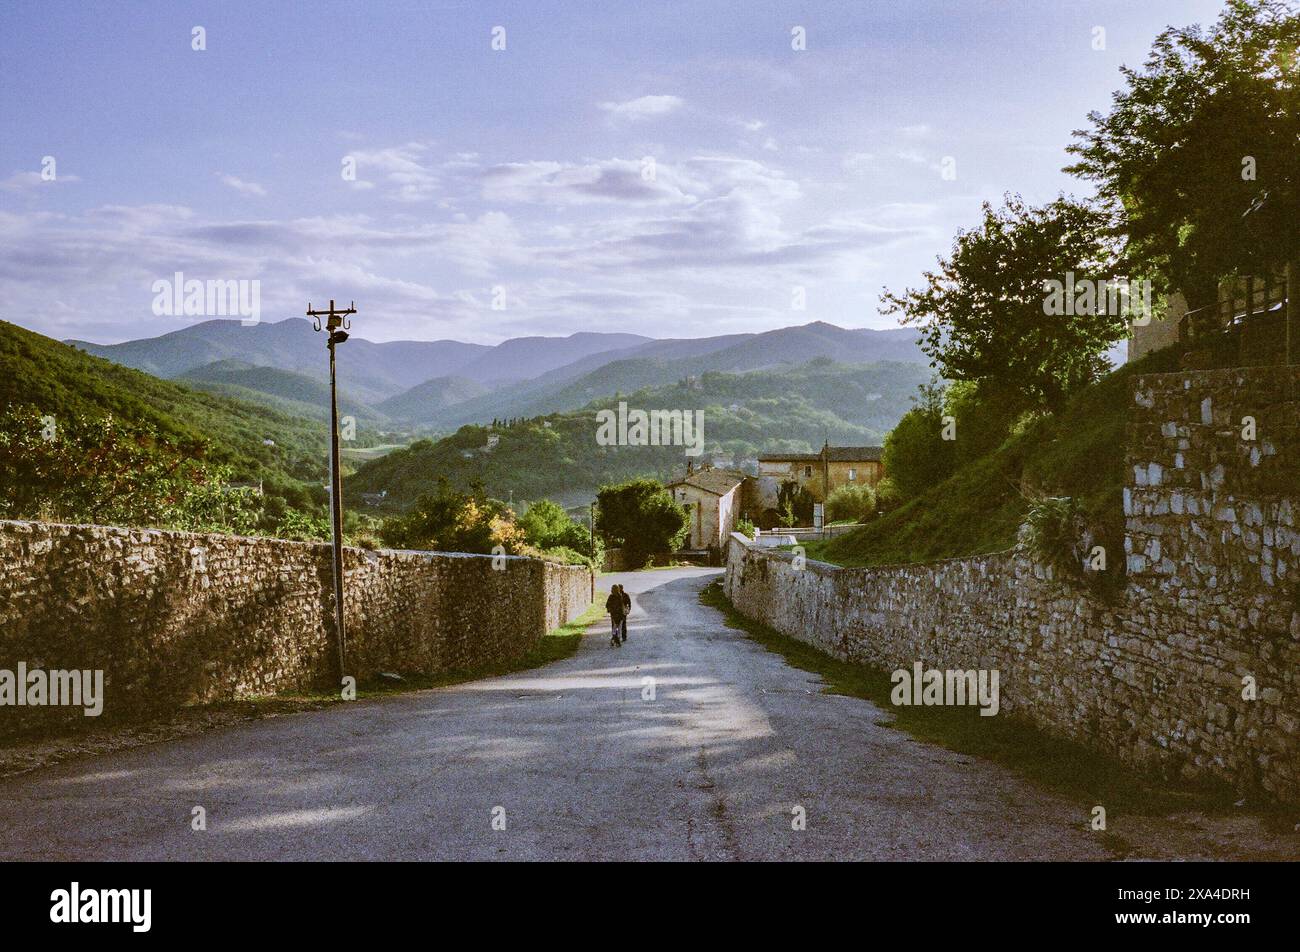 A serene view of an old rural road with stone walls on either side leading towards rolling green hills, with a single person walking in the distance under a soft sky. Stock Photo